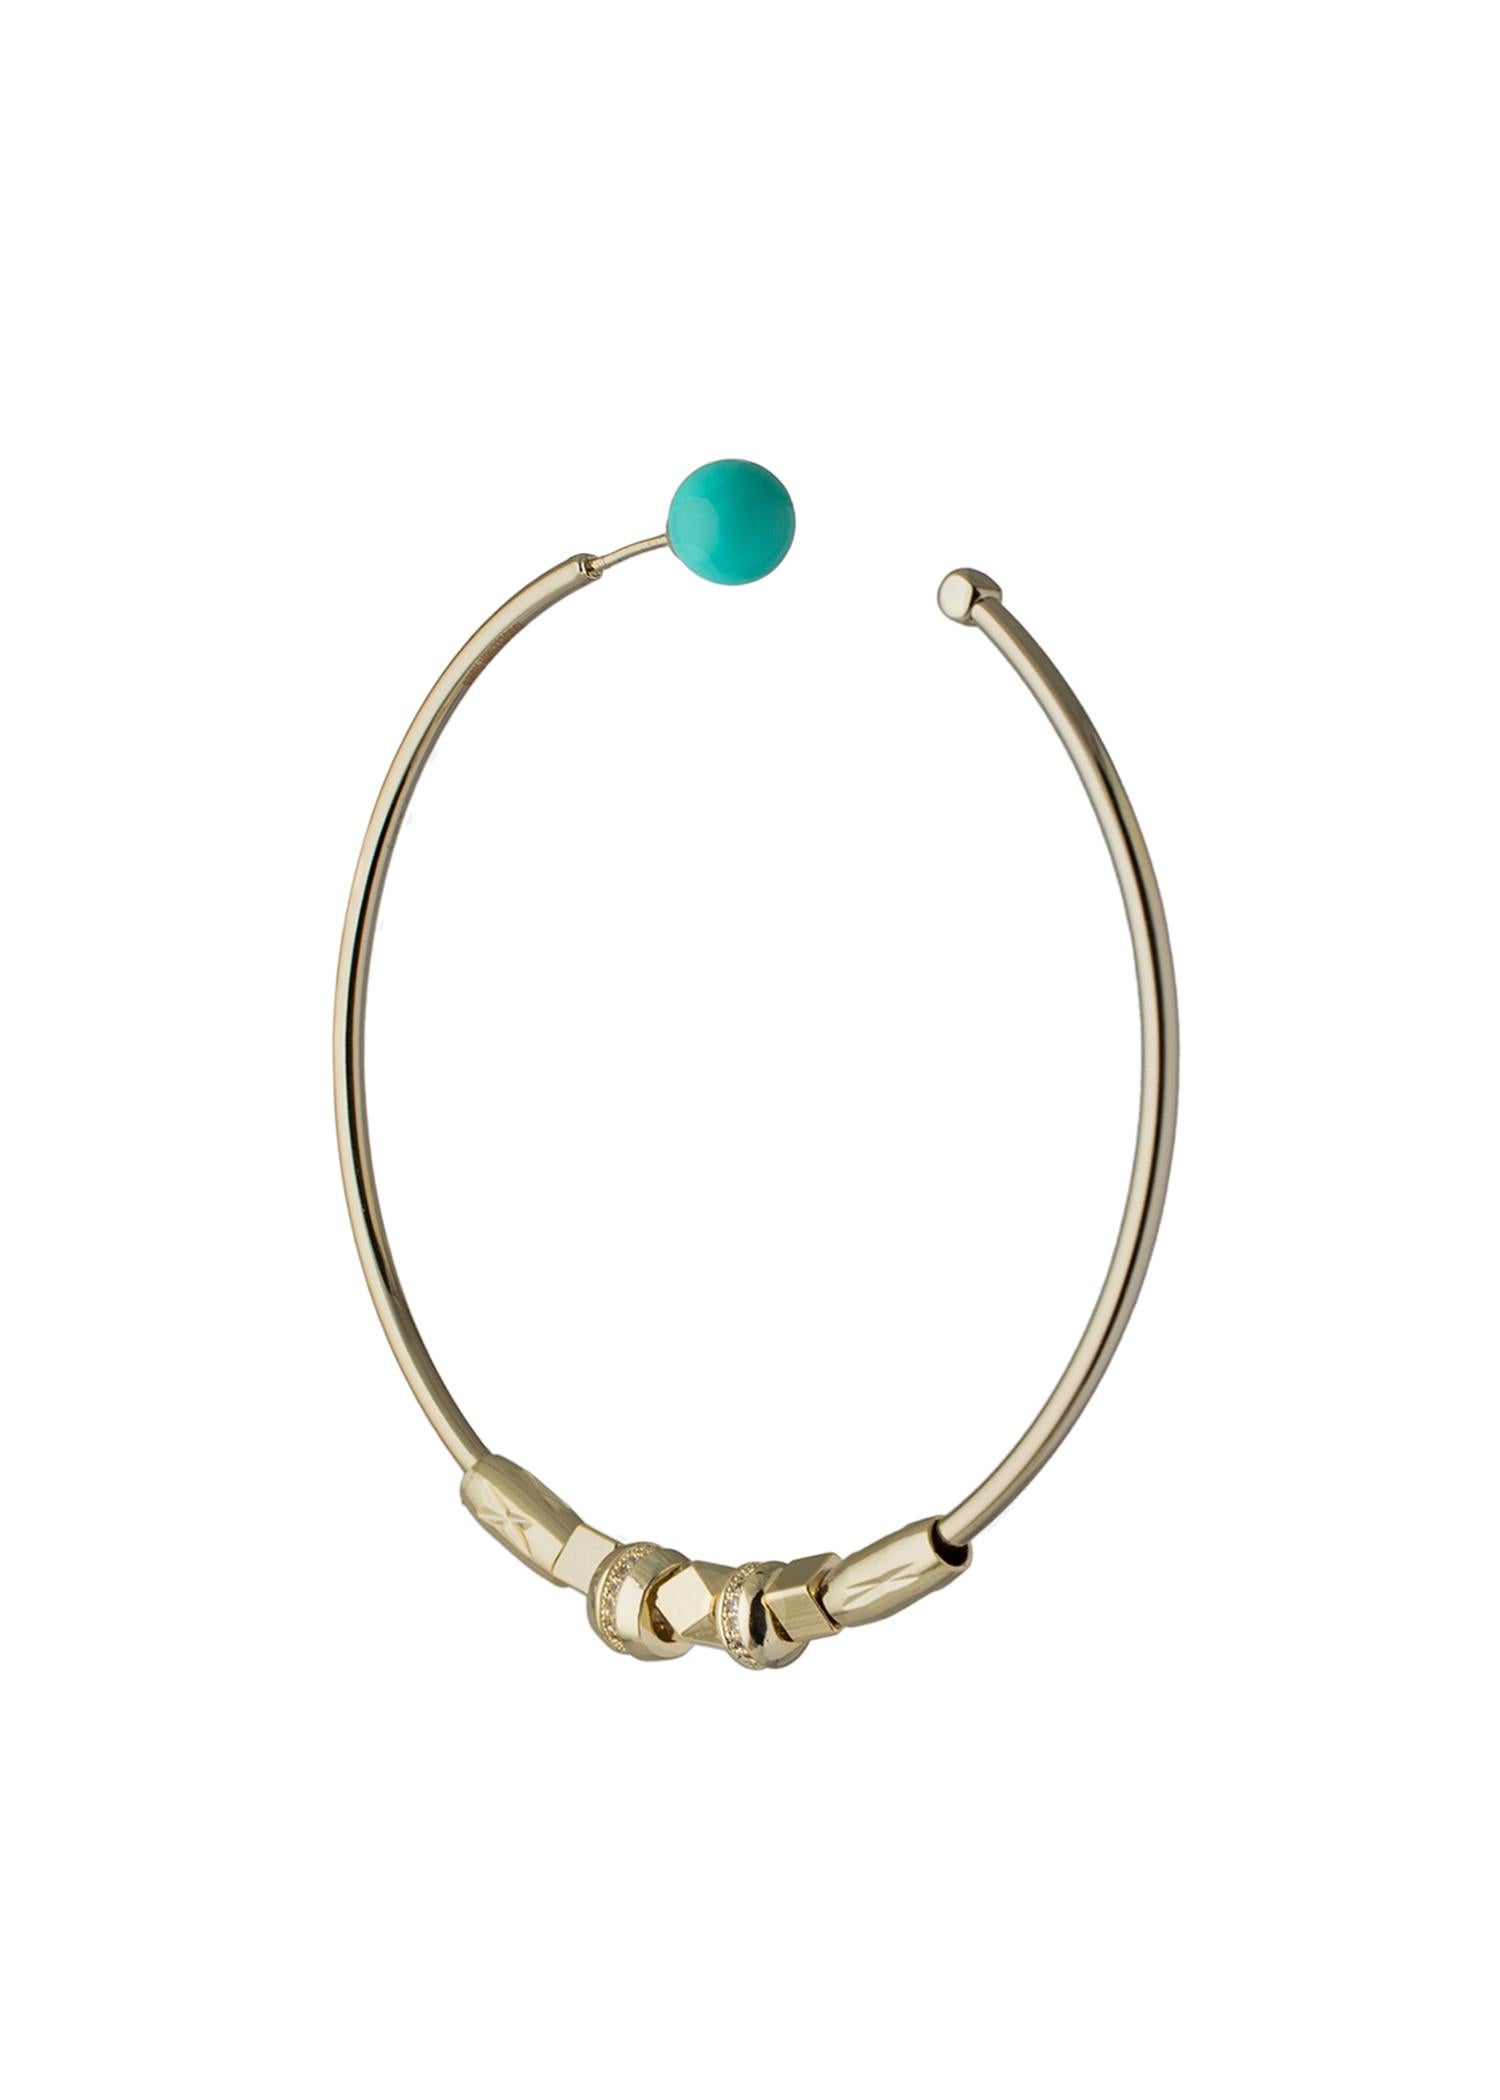 Women's Hoop Earrings with Freshwater Pearl and Turquoise Stoppers from IOSSELLIANI For Sale